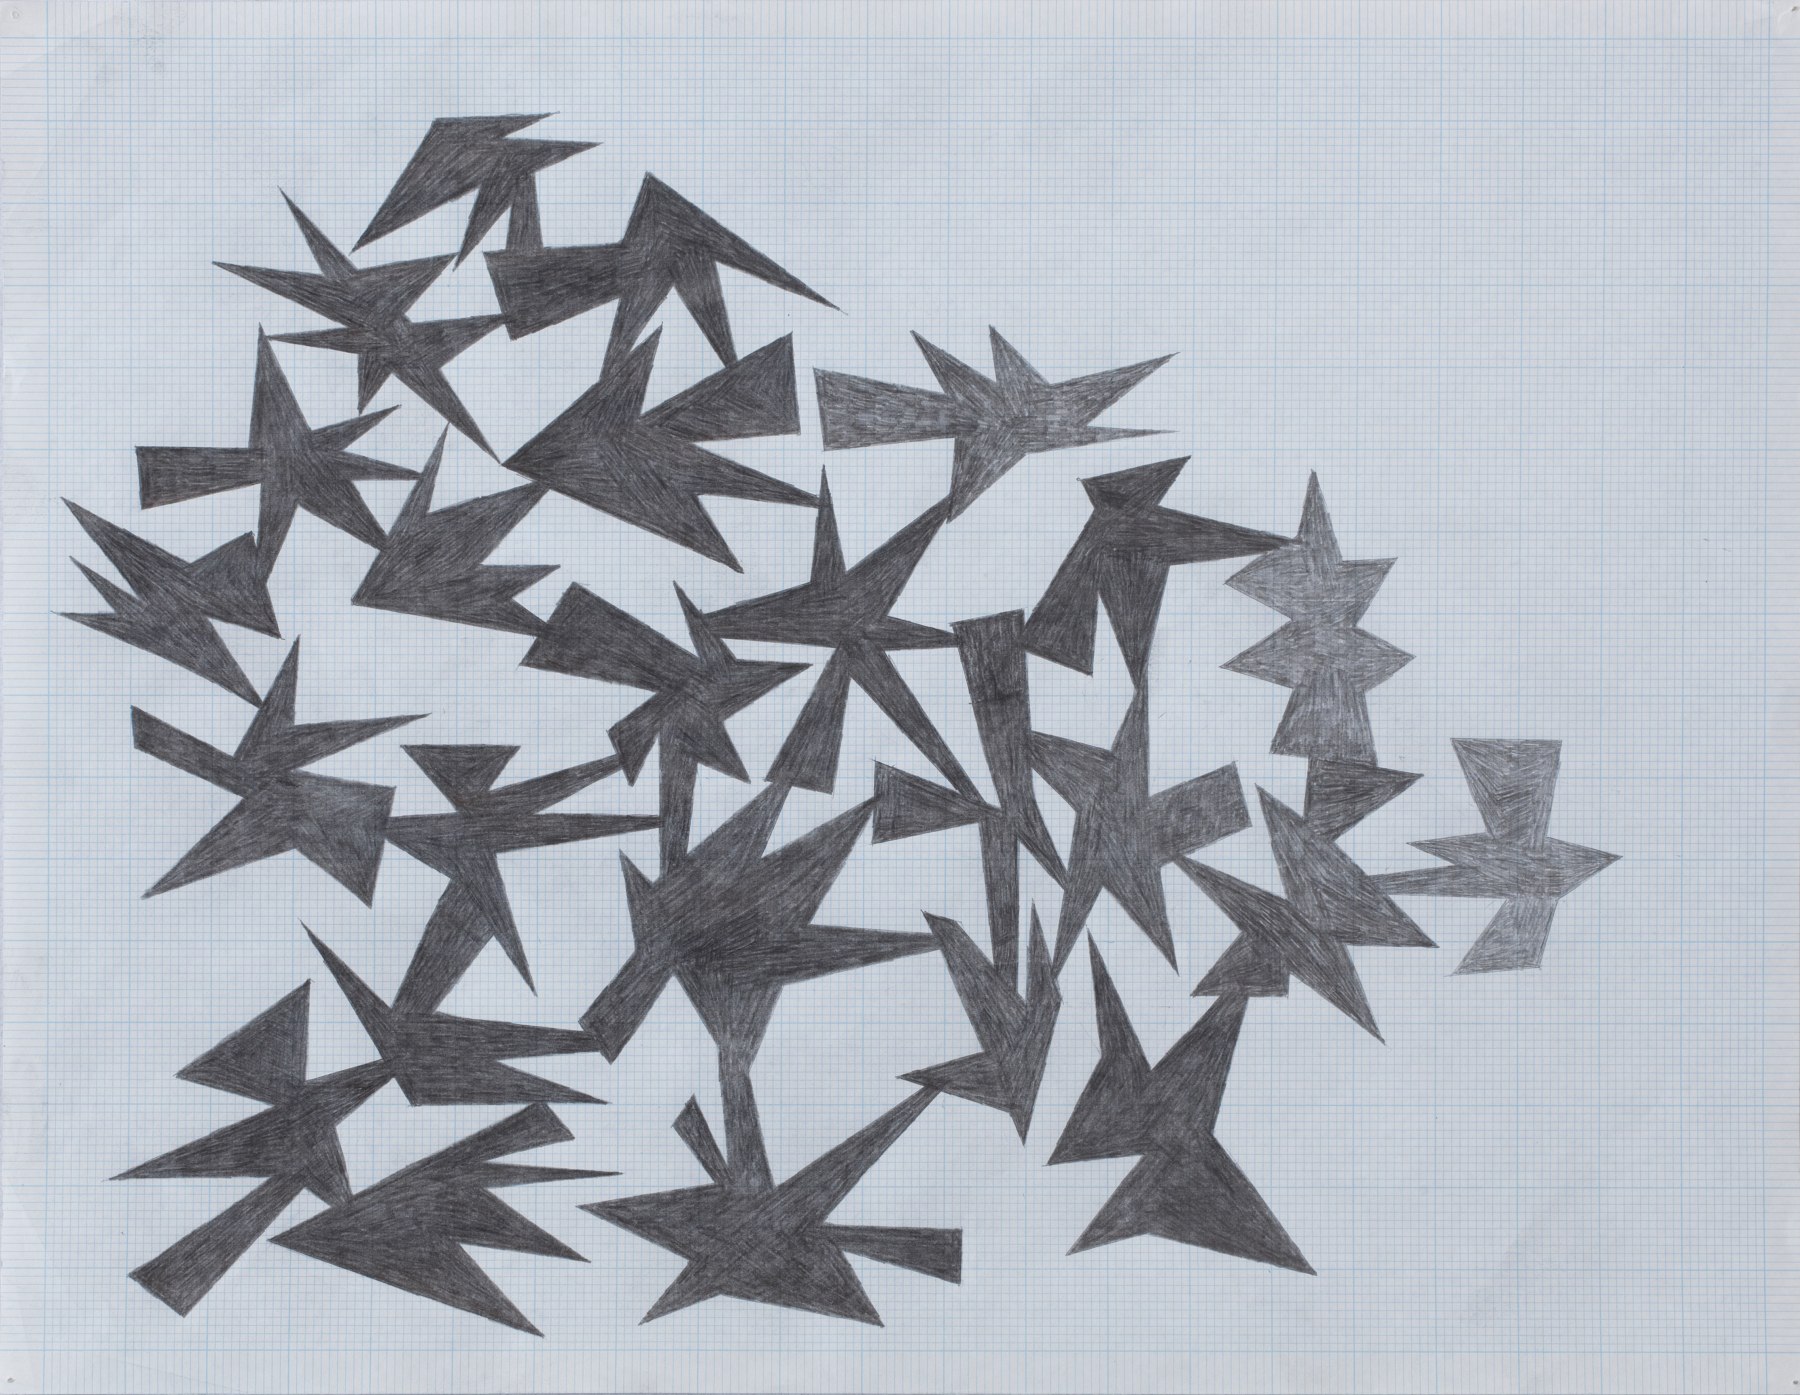 Enrico Riley  The Prehistory of Midnight, 2010  Graphite on graph paper  17 x 22 inches (43.2 x 55.9 cm)